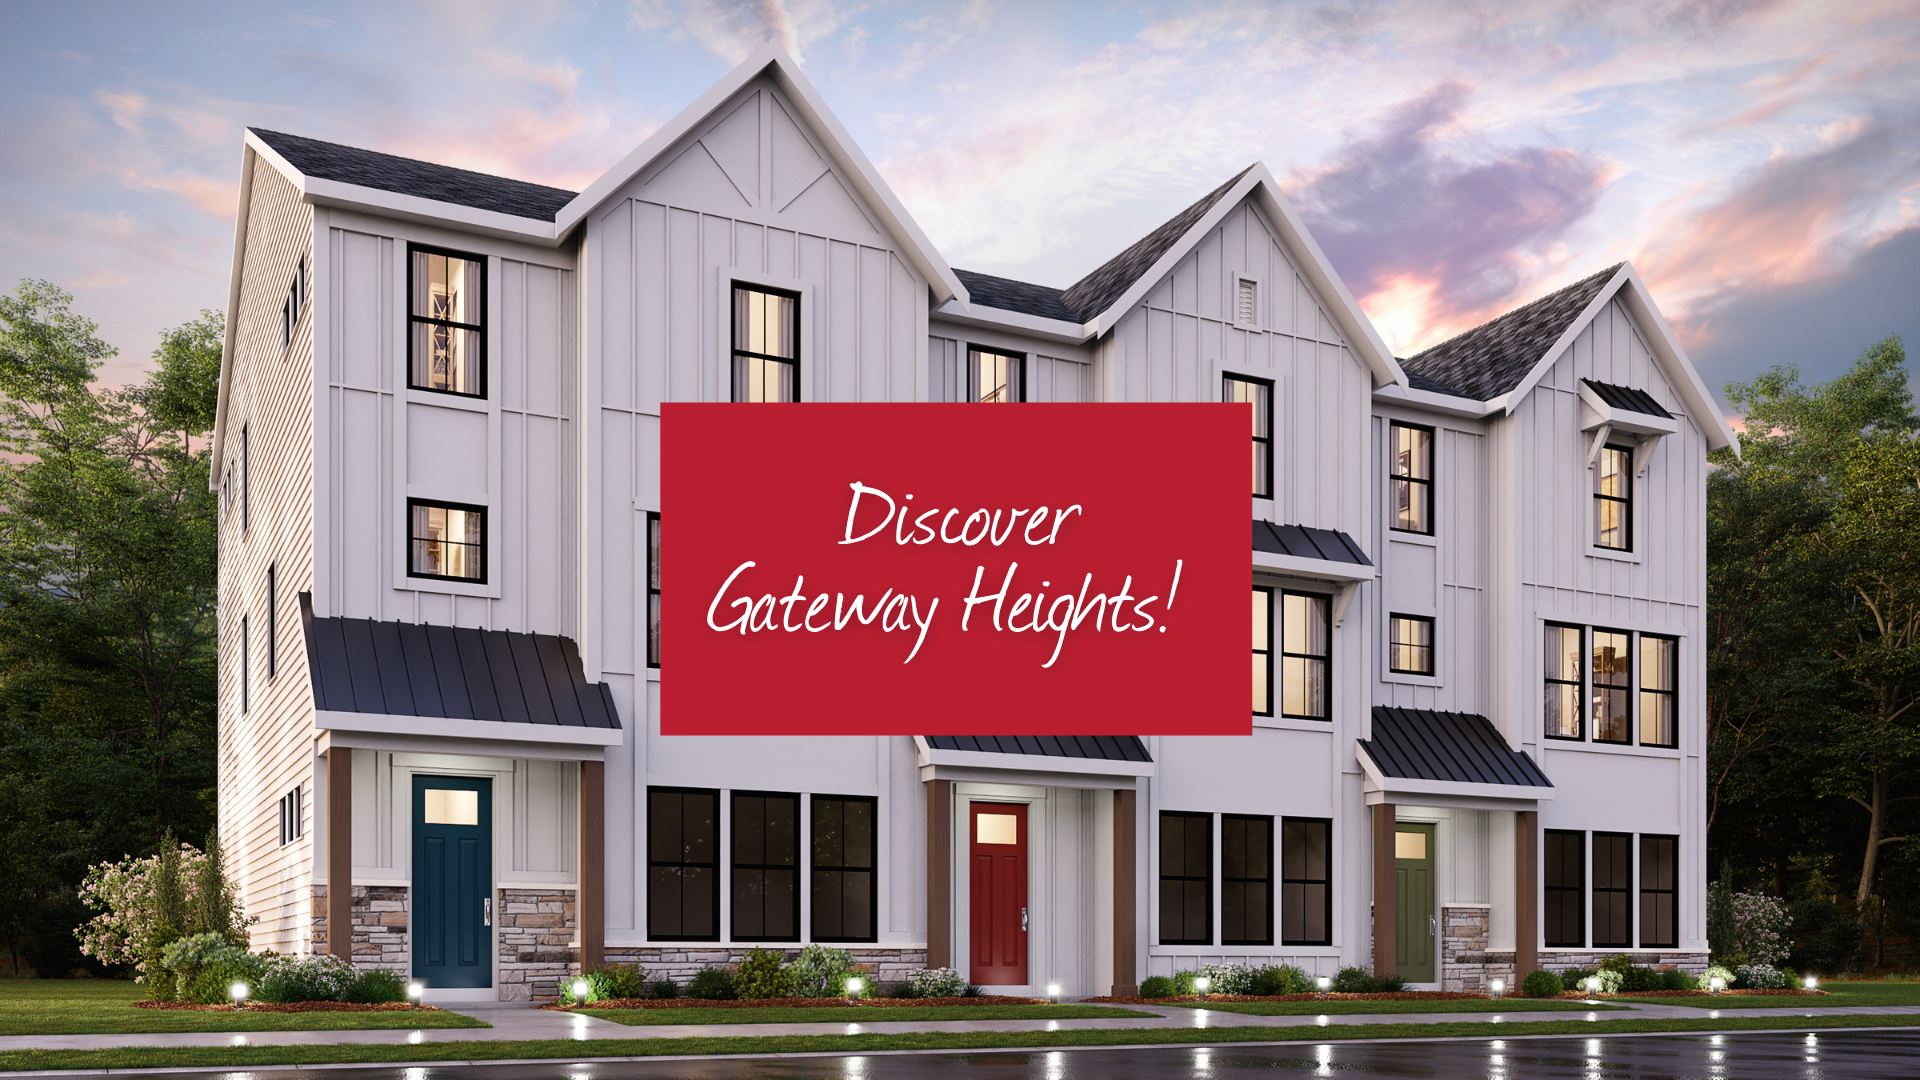 Gateway Heights, The Captivating Community For You!